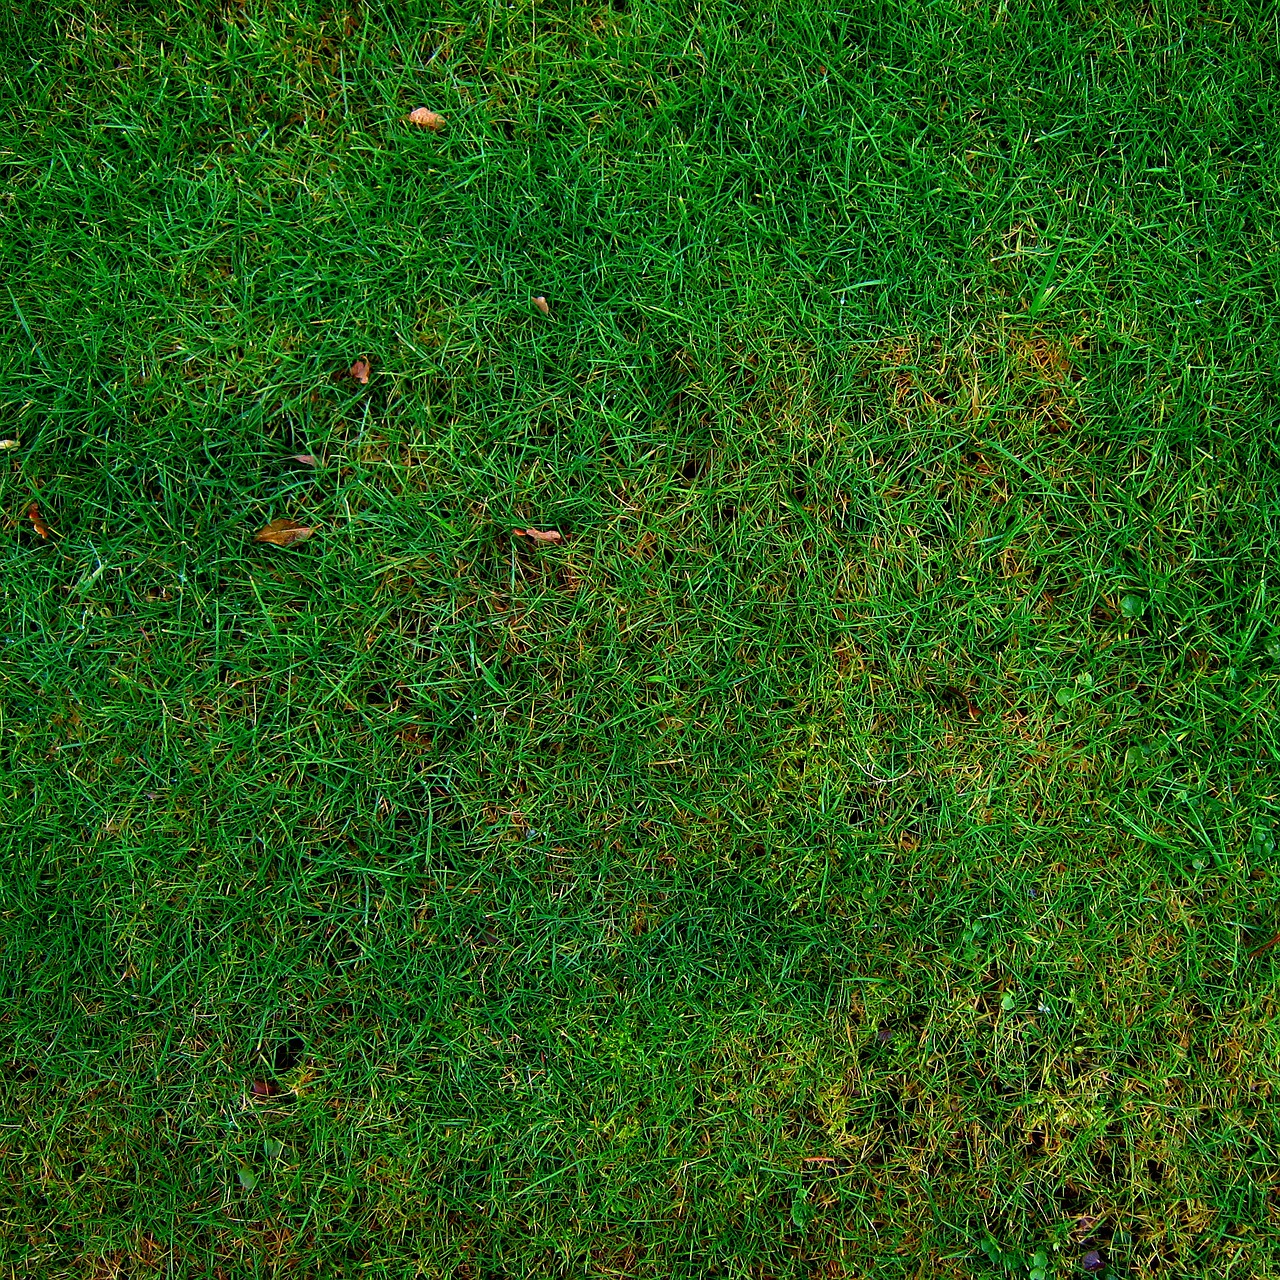 14 Reasons You Might Have Lawn Burn, or Yellow/Brown Patches On Your ...